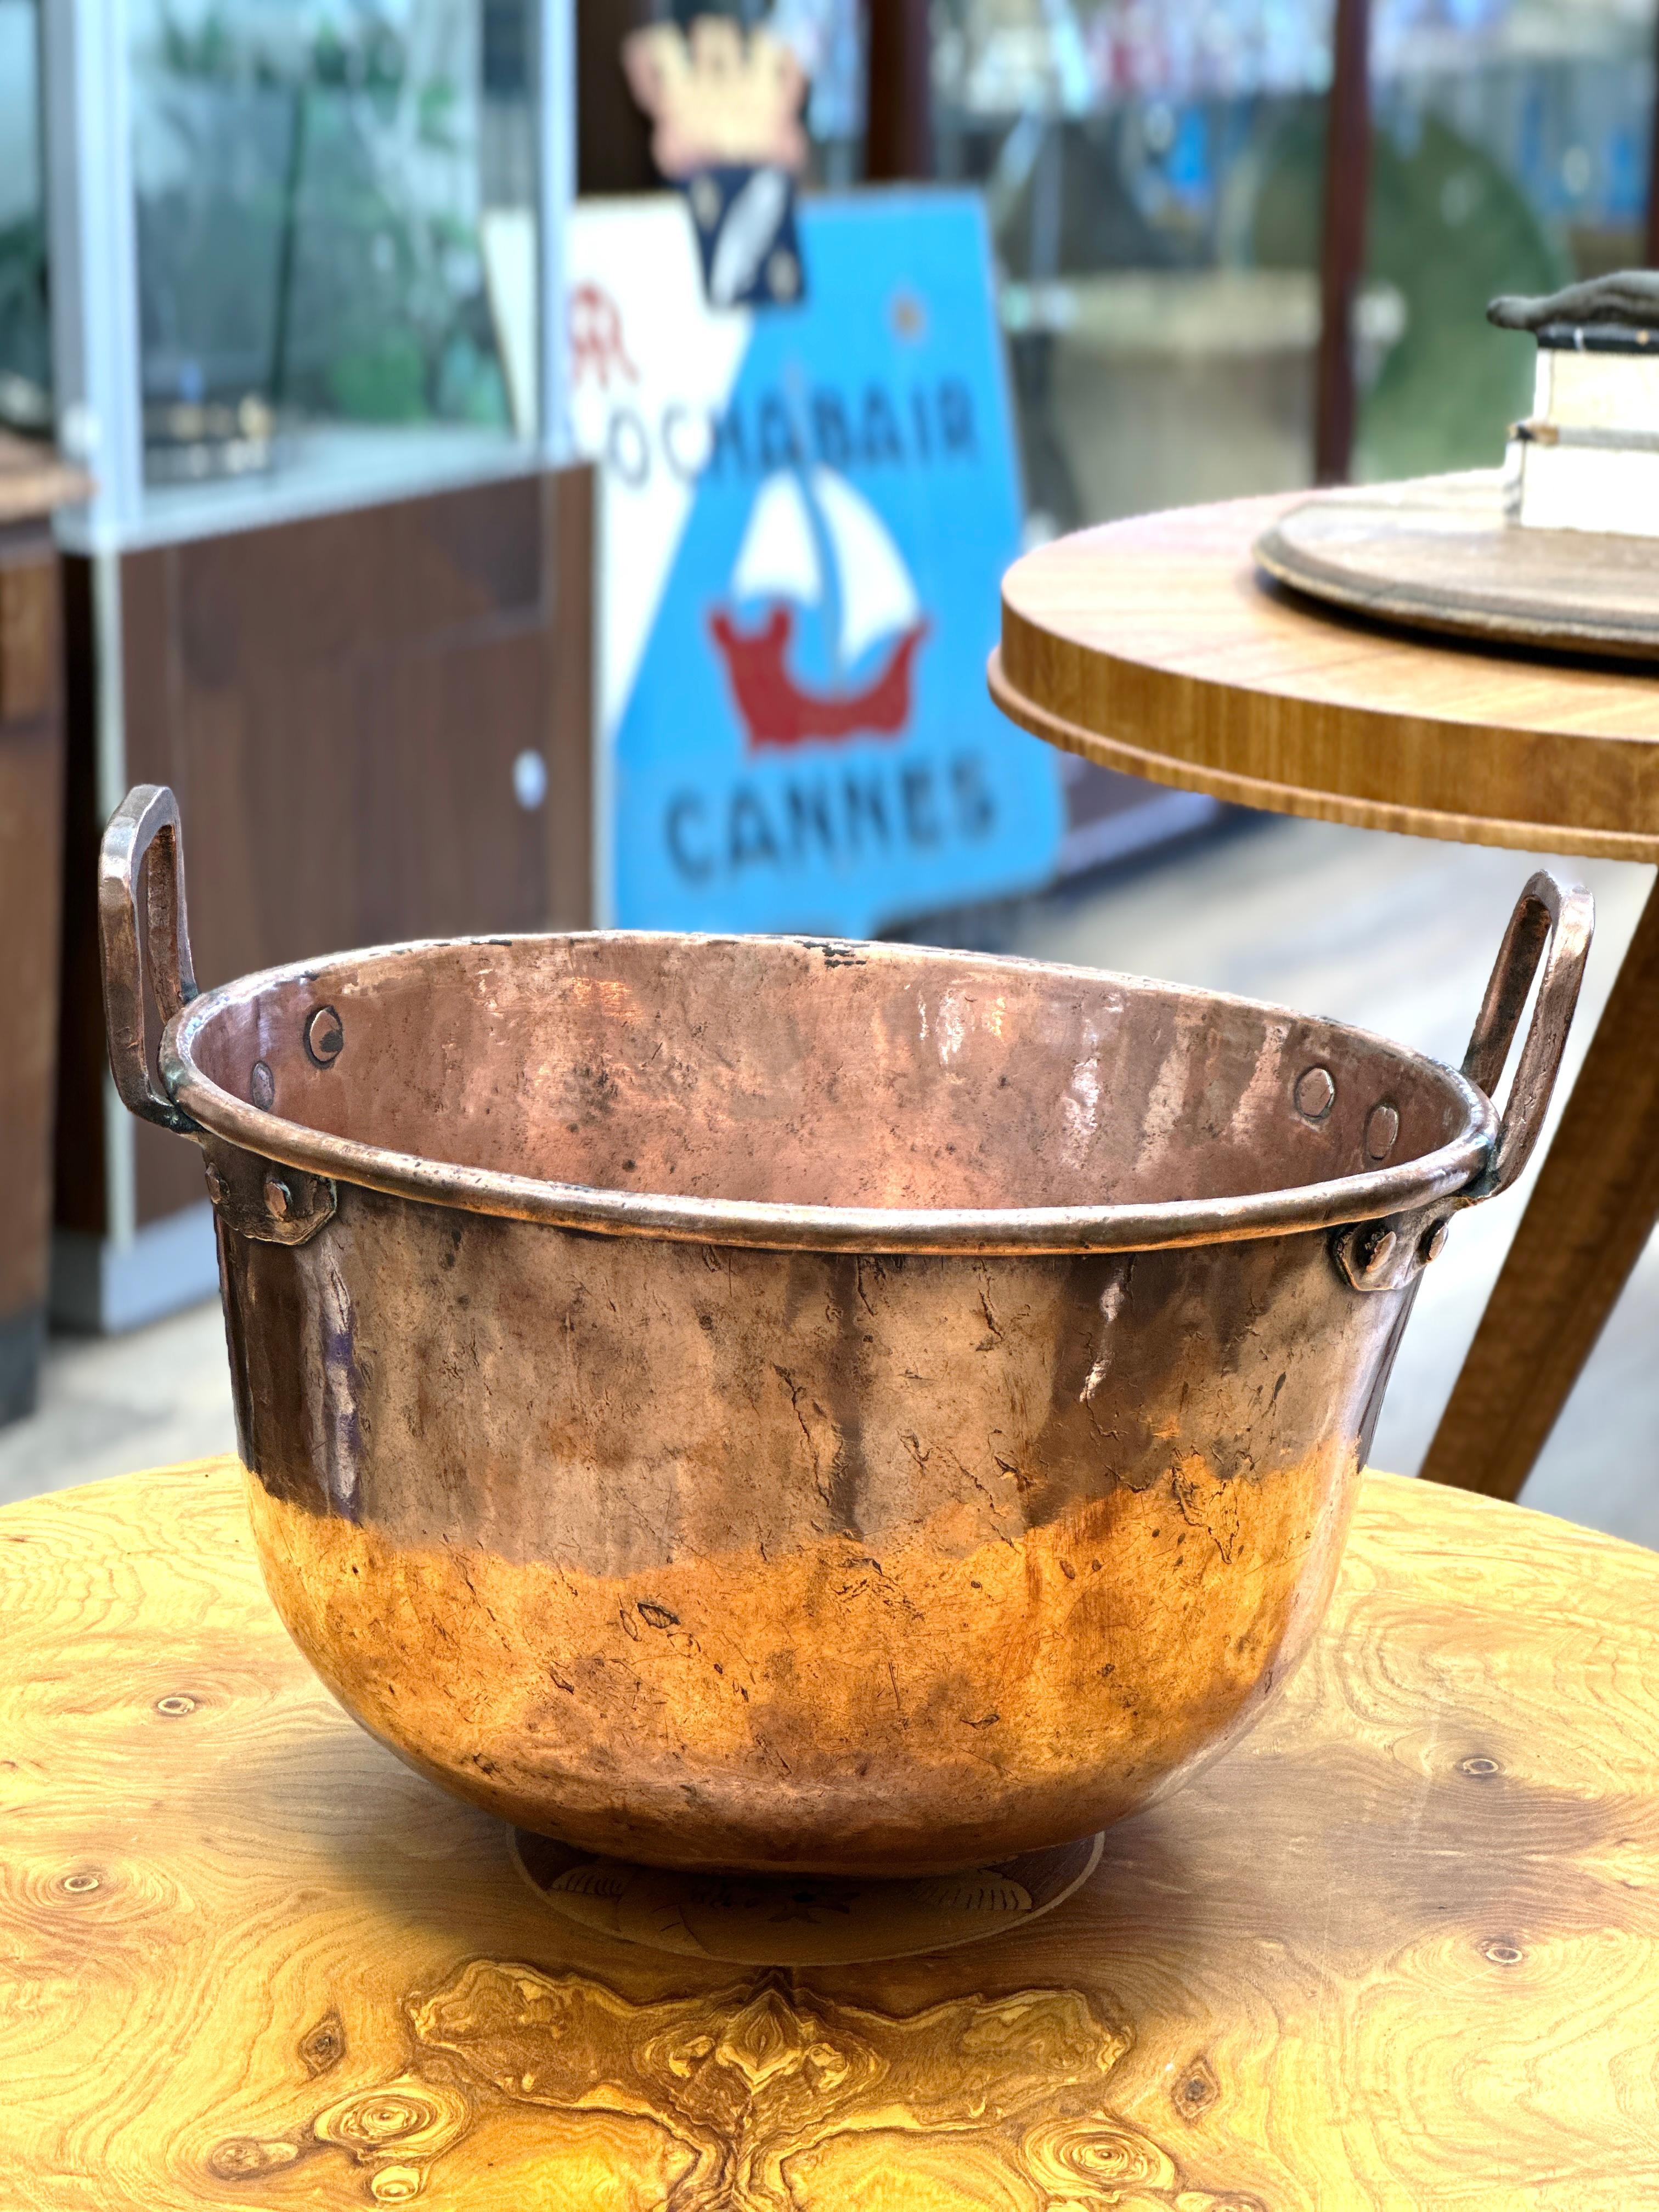 Here is a lovely Mid-19th Century French Copper Jelly and Jam Boiling Bowl 

Bring an authentic French countryside touch to your kitchen with this large antique copper marmalade bowl. Made in France, circa mid 19th century, this decorative “Bassine